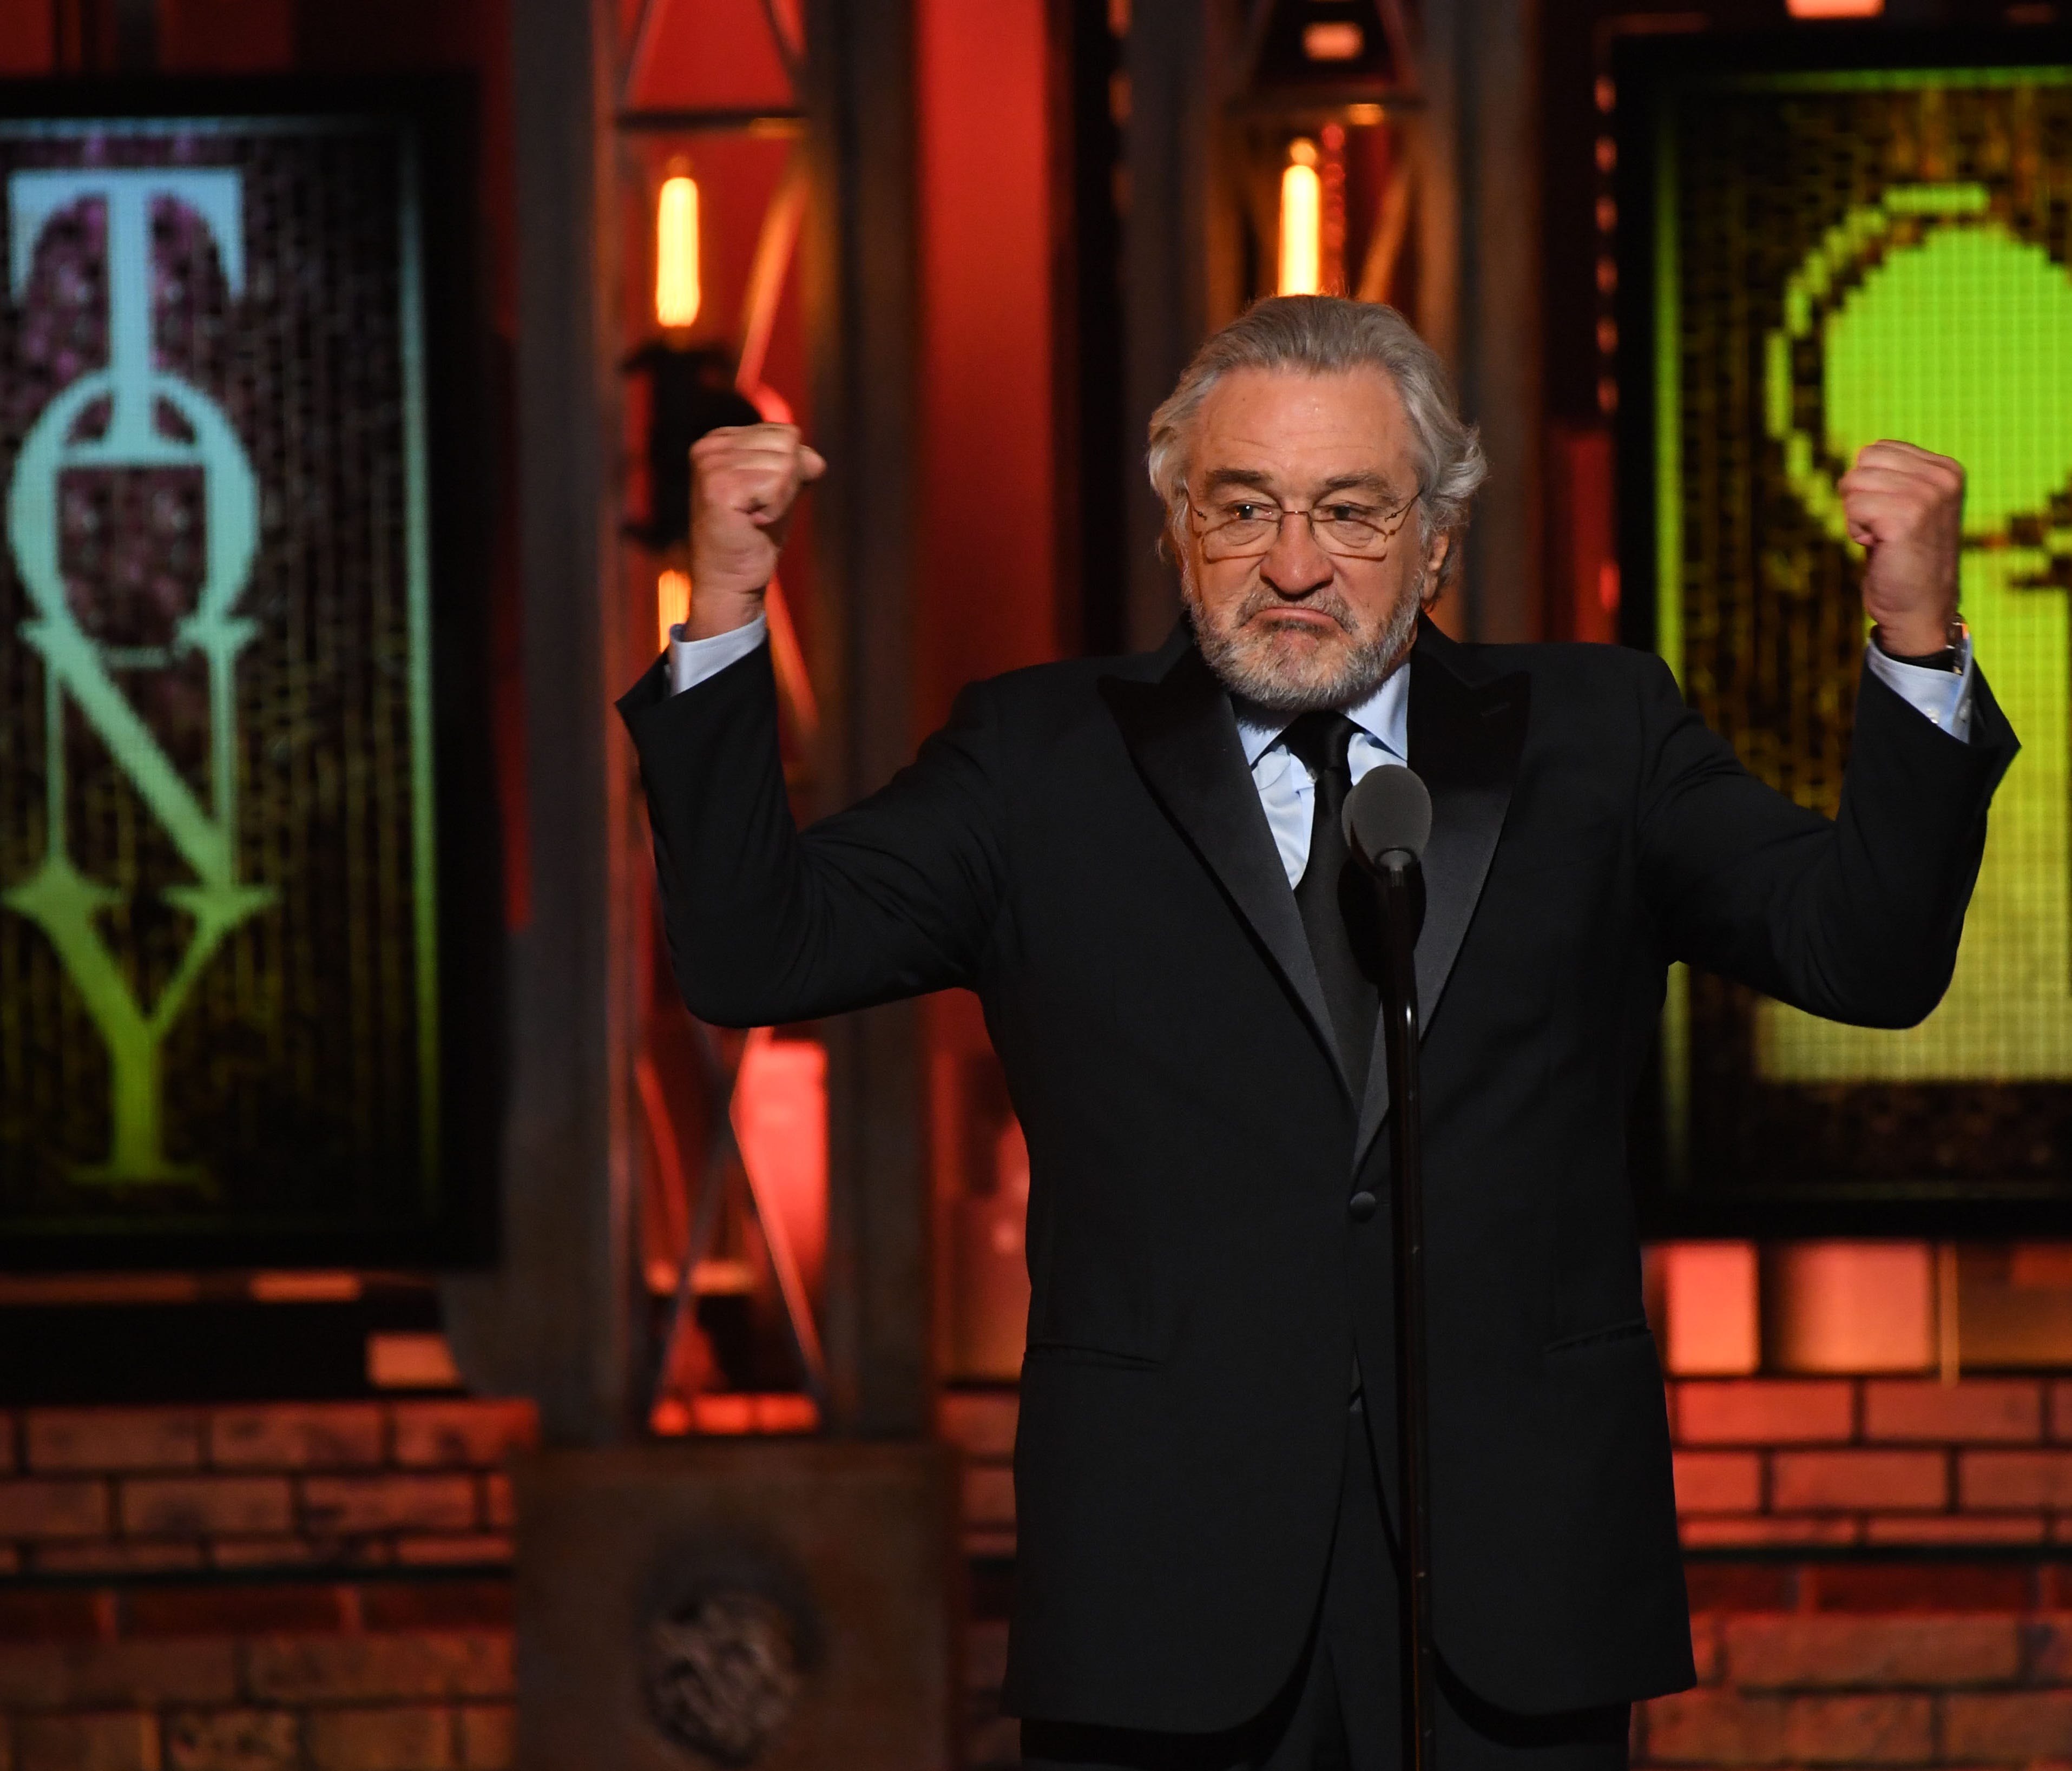 Robert De Niro delivers a speech partially censored from the broadcast during his introduction of a performance by Bruce Springsteen at the 72nd Tony Awards at Radio City Music Hall.